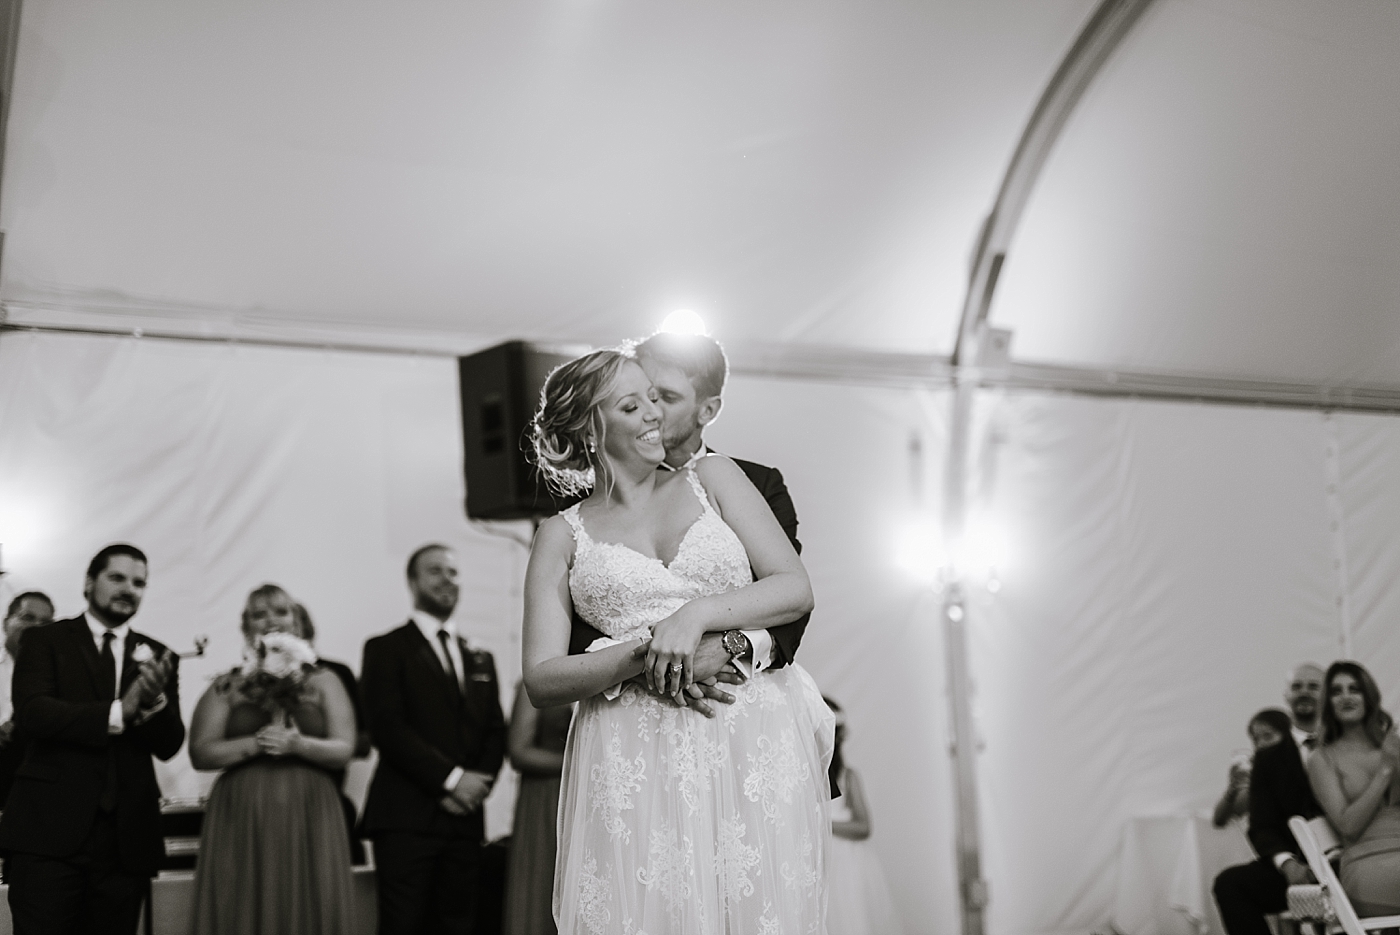 Rainy & Romantic Wedding at Misselwood at Endicott College in Beverly, MA by Boston Wedding Photographer Annmarie Swift